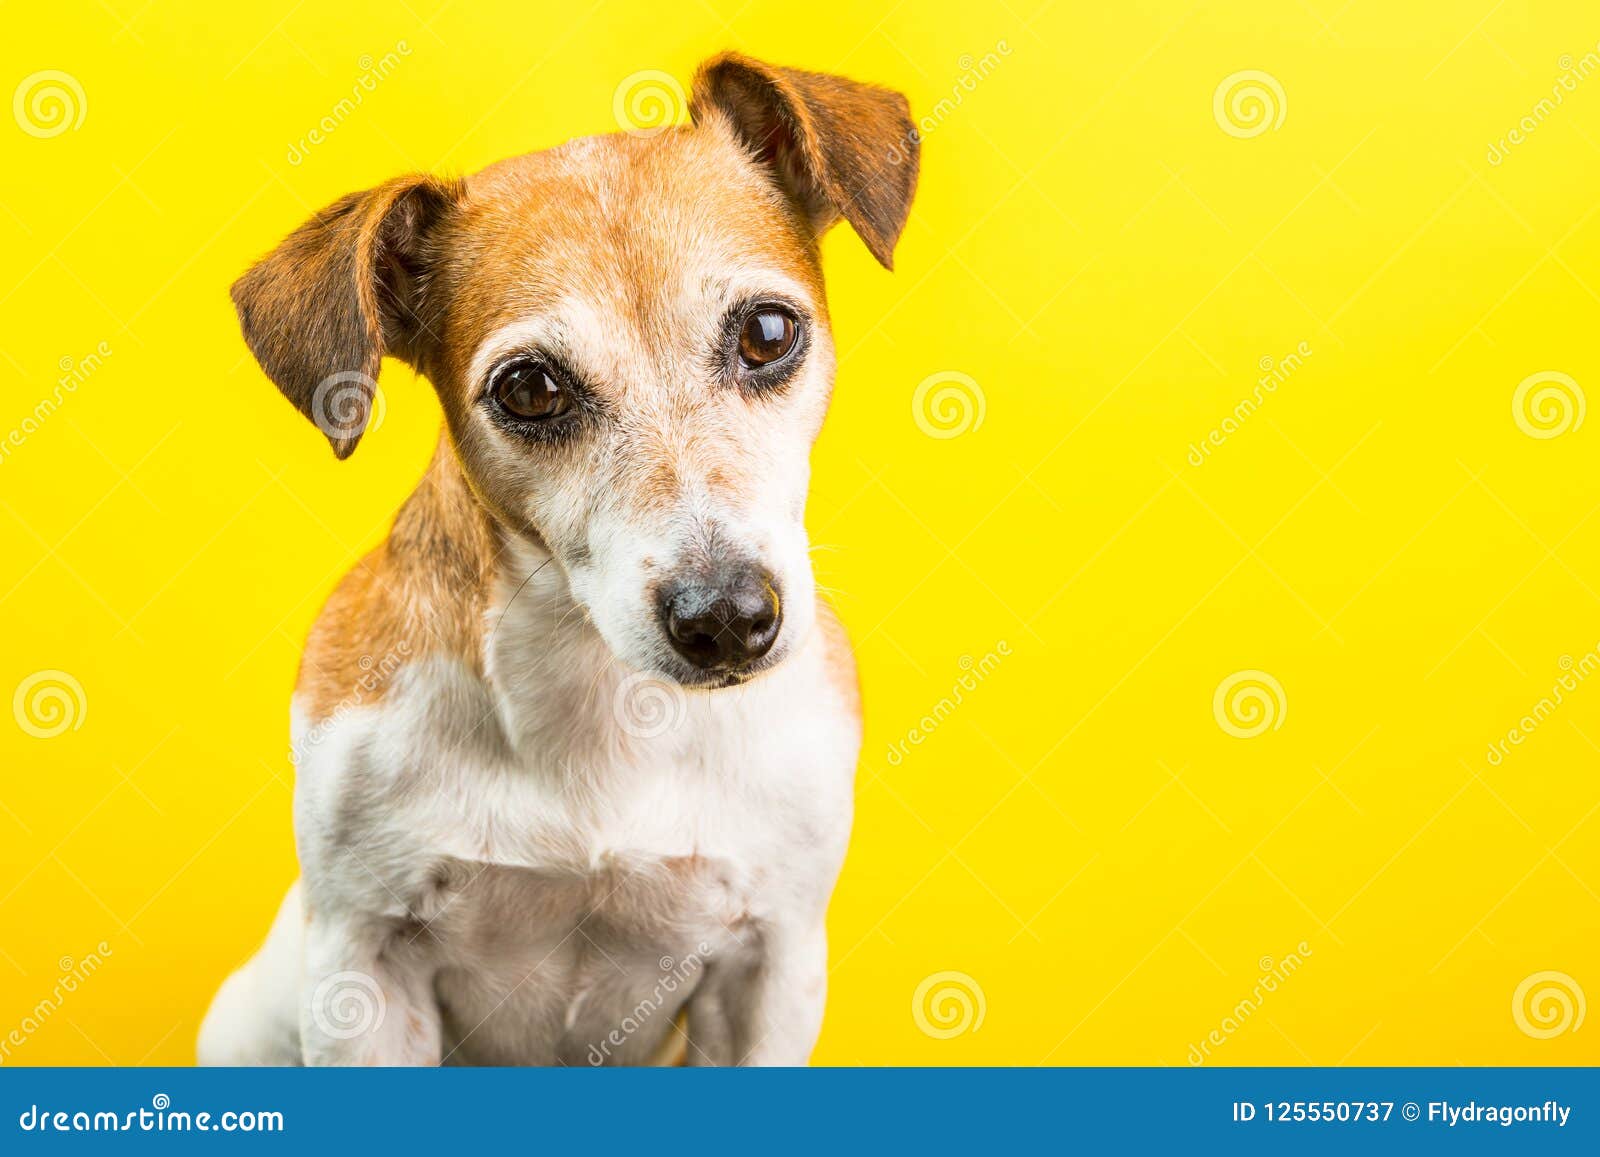 Adorable Cute Dog on Yellow Background. Stock Image - Image of pooch